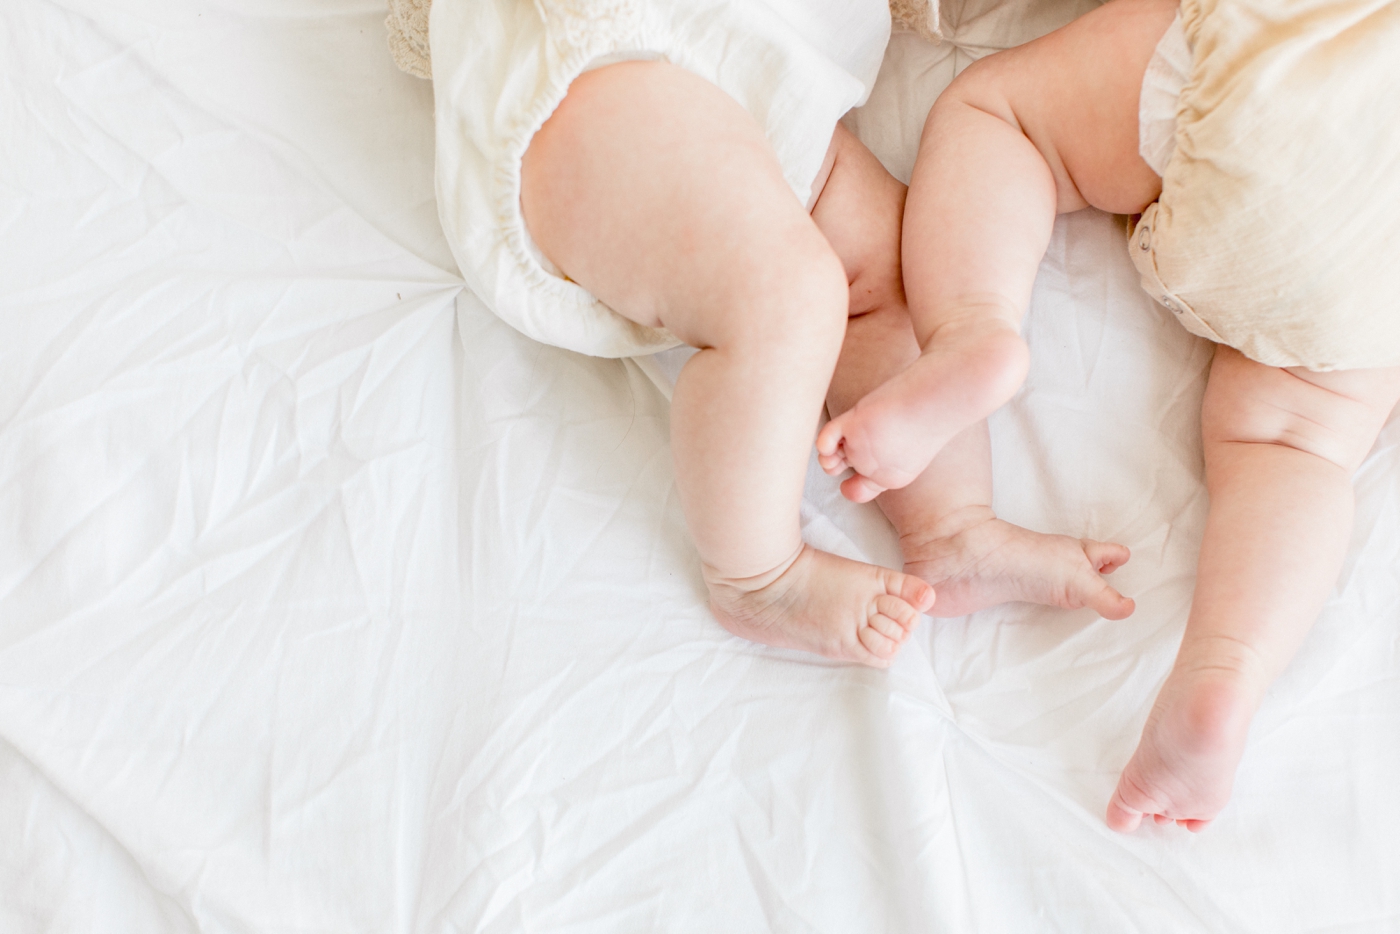 Closeup of feet of twin baby girls wearing lace rompers. Photo by Sana Ahmed Photography.